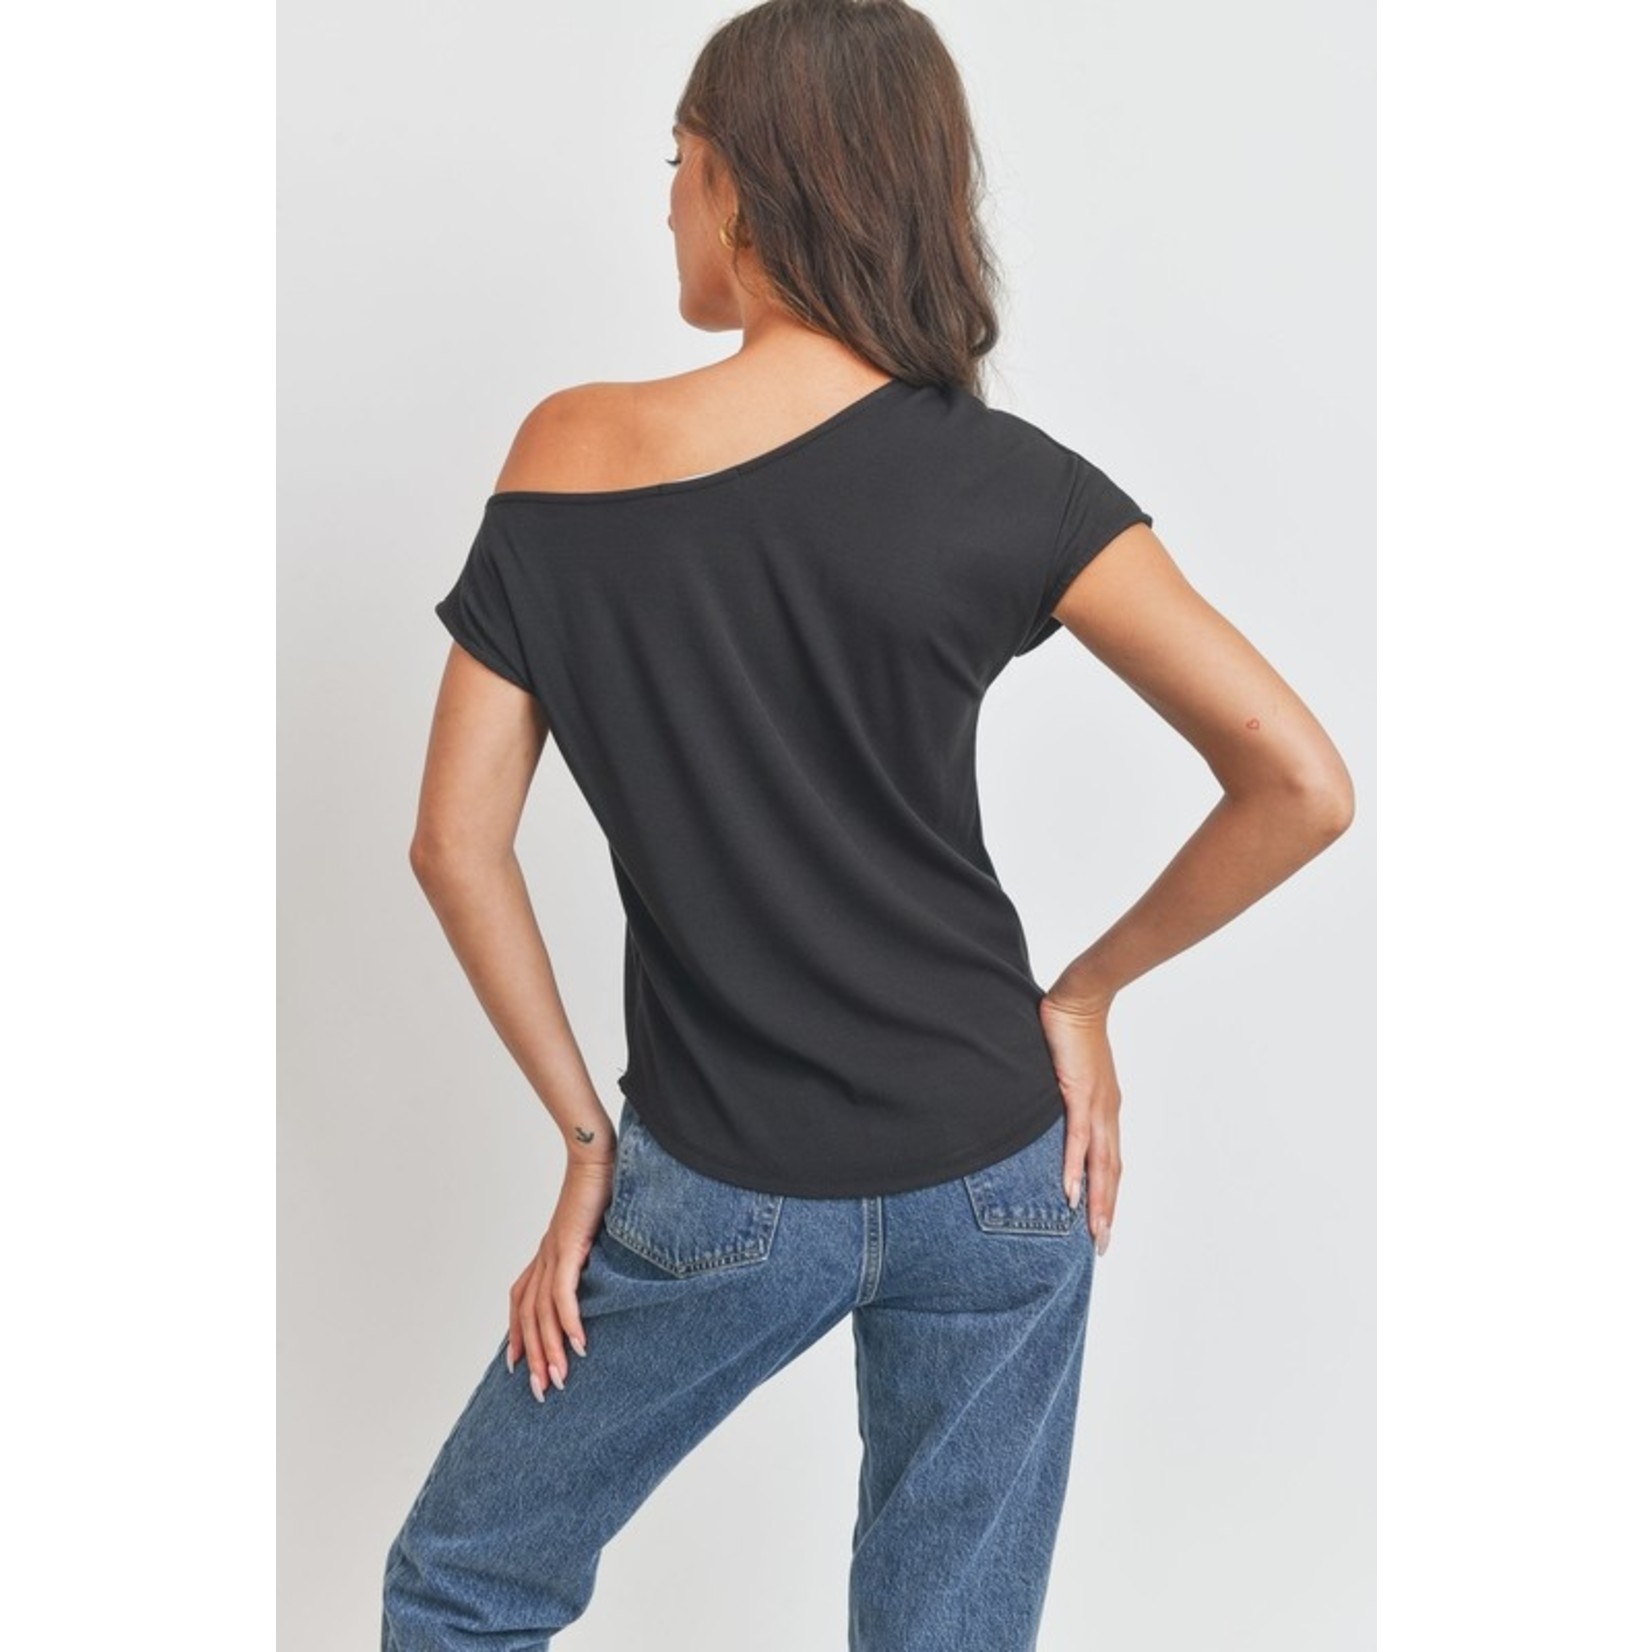 The Everly Top